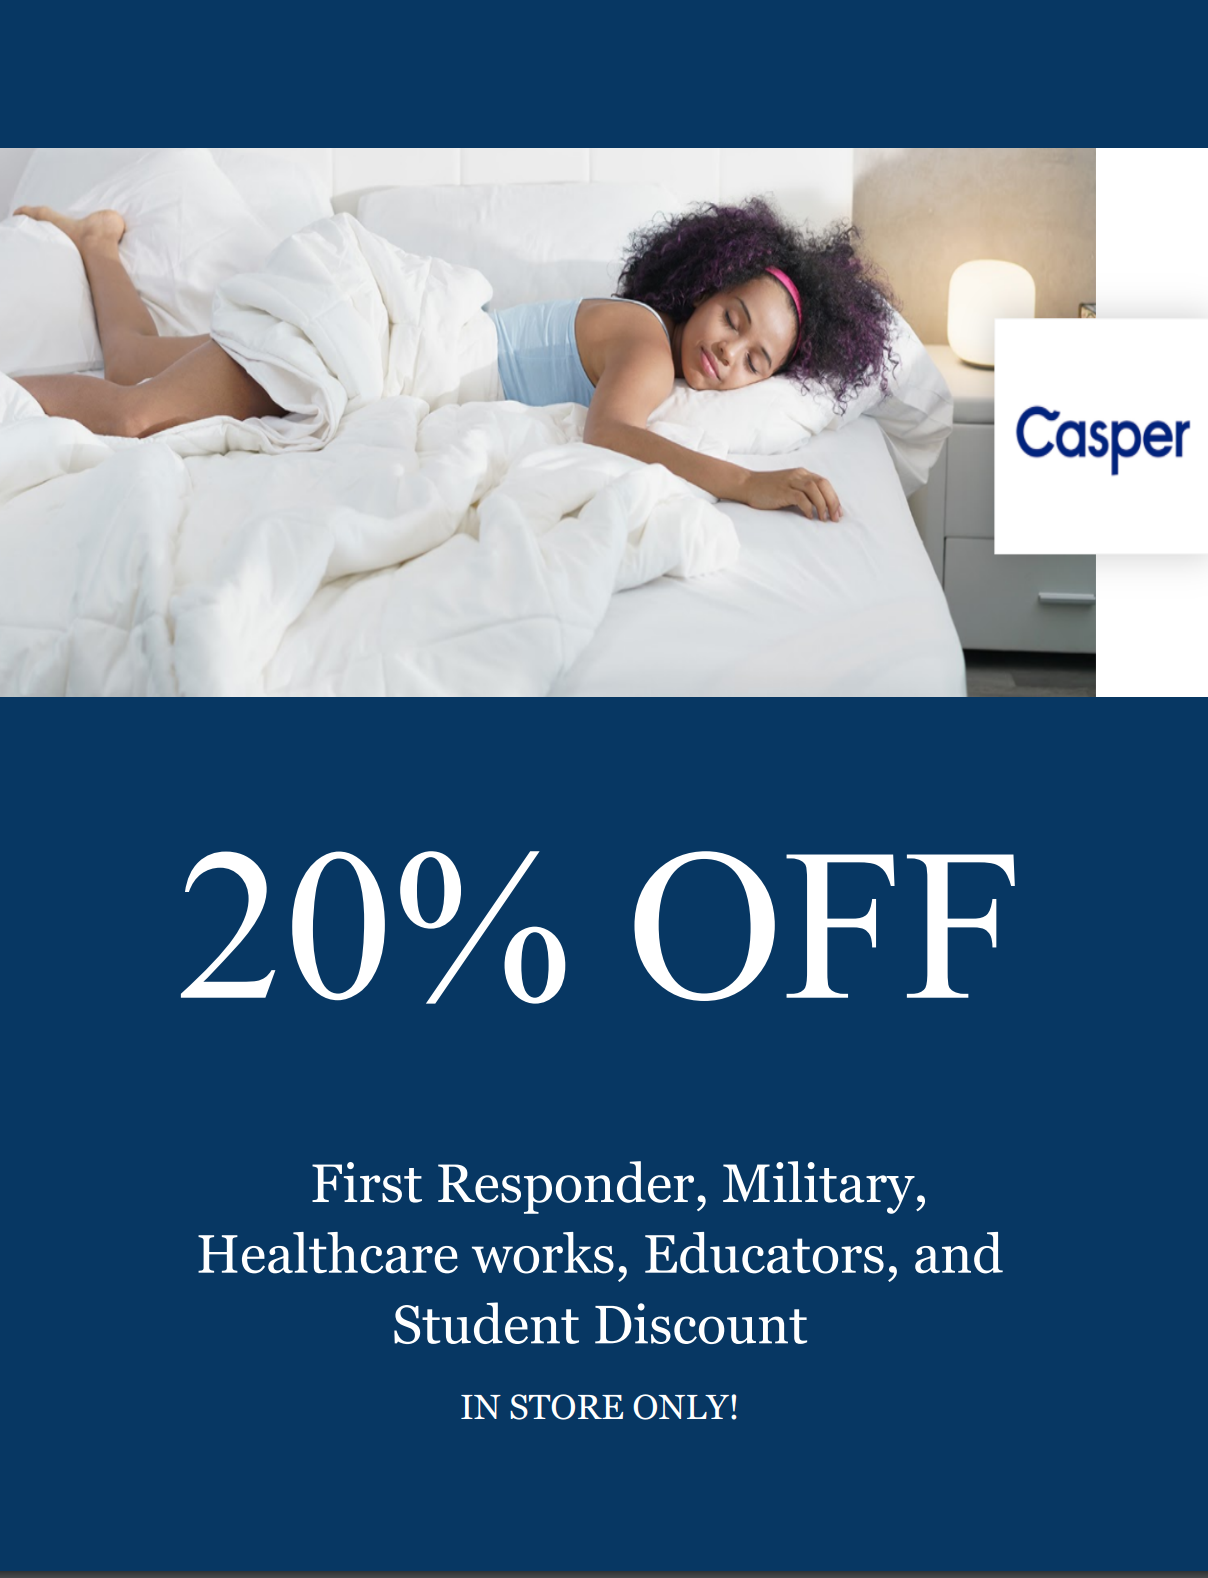 20% off for military, healthcare, first responders and educators